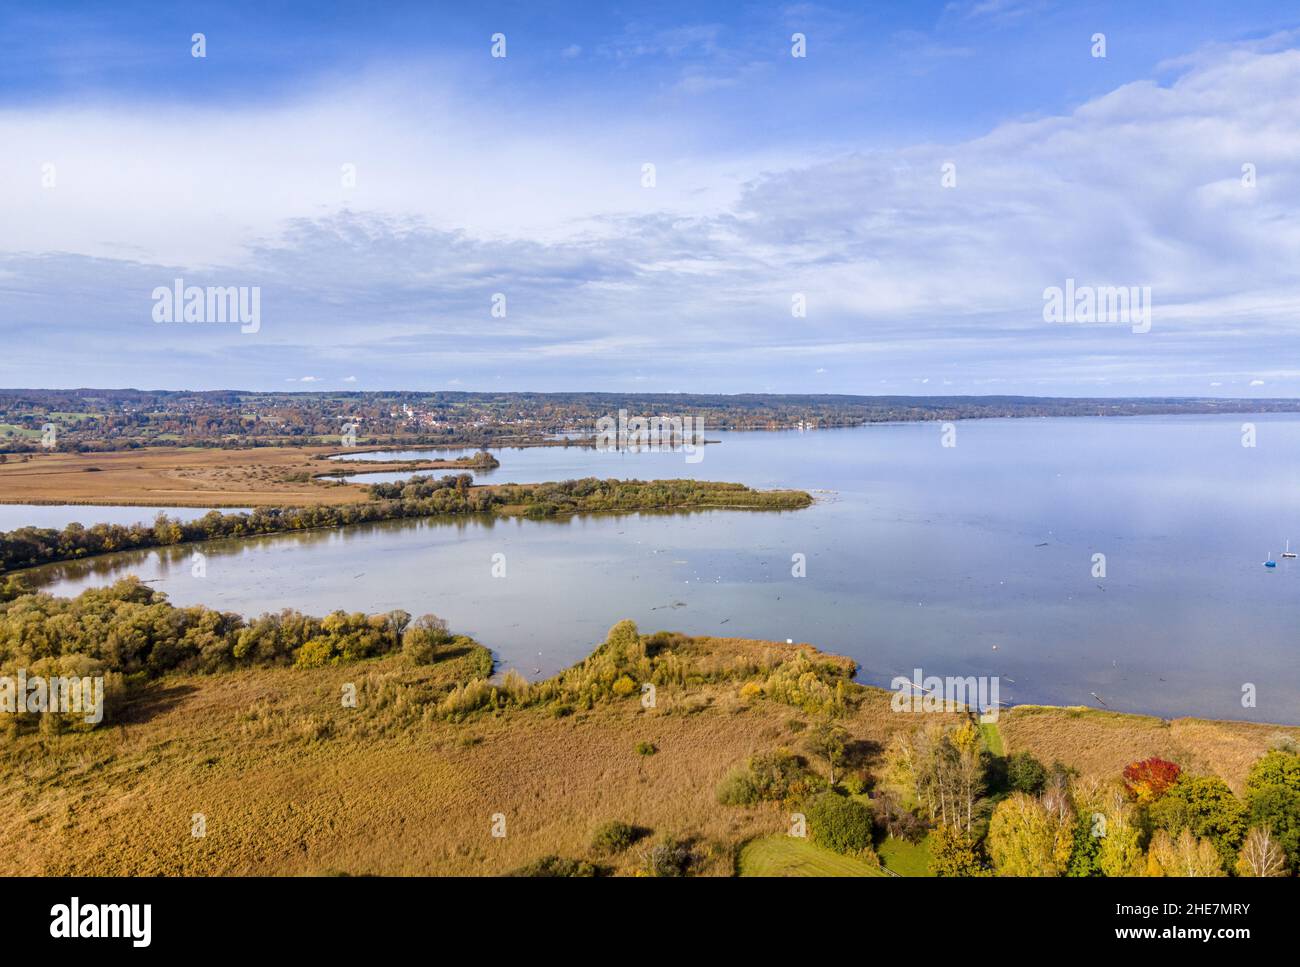 Ammersee vicino ad Aidenried, Baviera, Germania Foto Stock